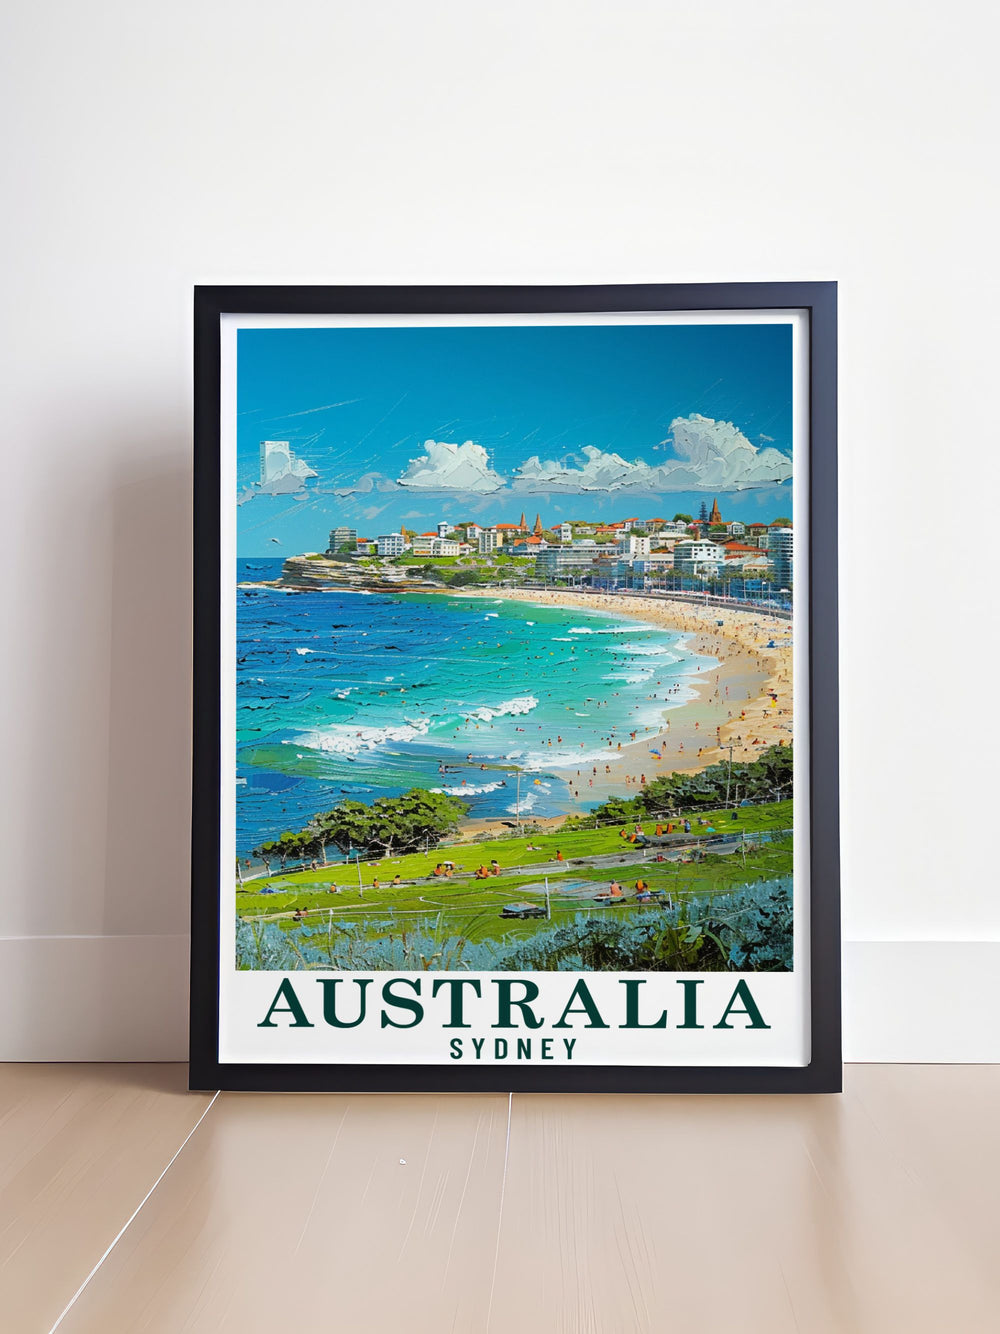 Bondi Beachs vibrant atmosphere and golden sands are beautifully captured in this travel poster, showcasing Sydneys iconic beach scene. Perfect for adding a touch of Australian coastal charm to your decor.